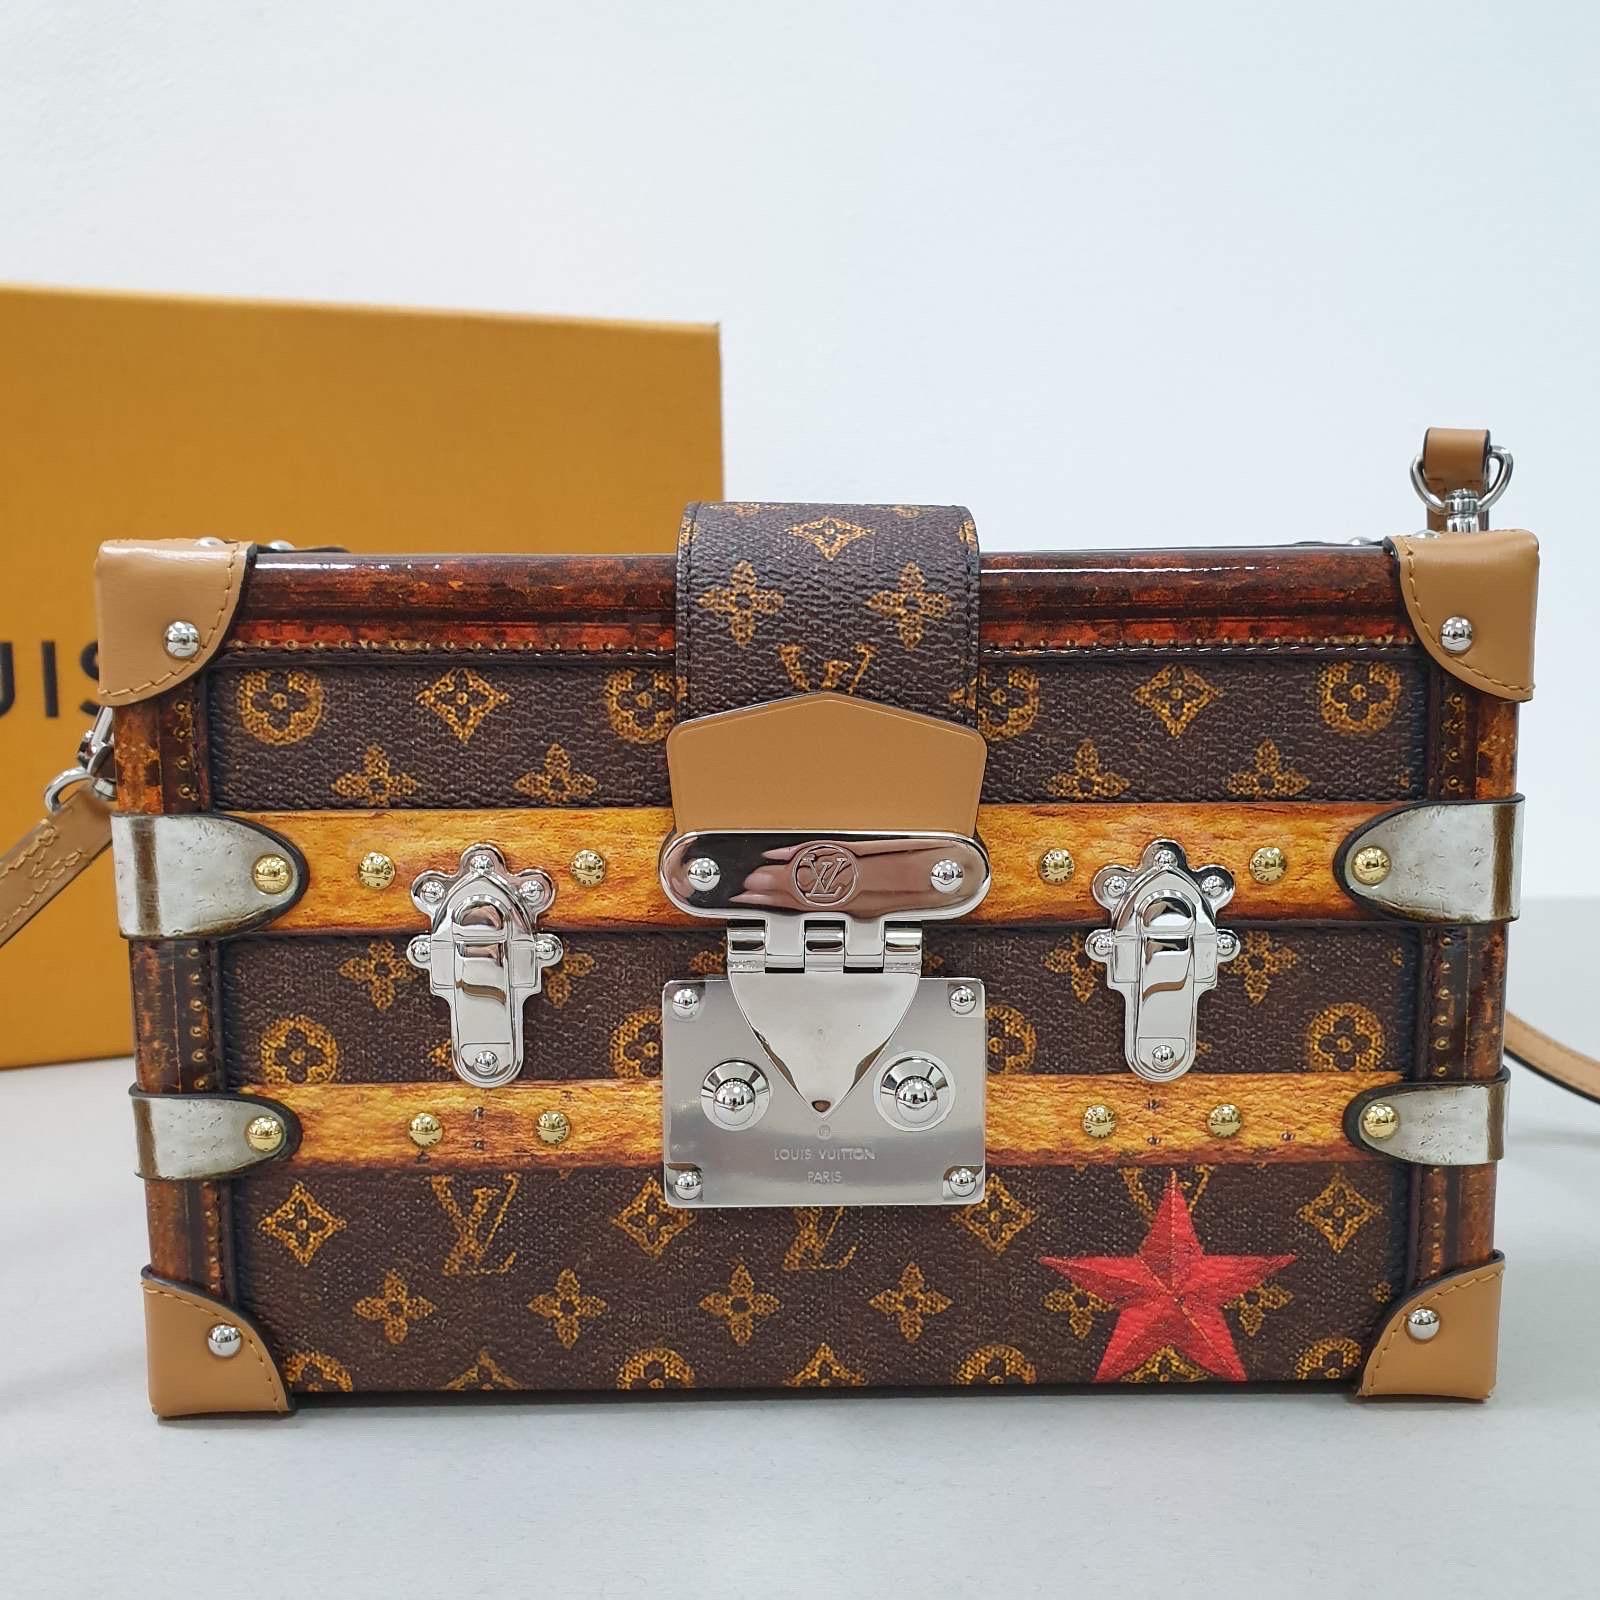 Every detail of the Petite Malle handbag is inspired by the history of Louis Vuitton trunks: the shape, the Monogram Reverse canvas, the gold-tone lock and fittings – even the sheepskin lining reprises a classic House motif. Impeccably crafted, this